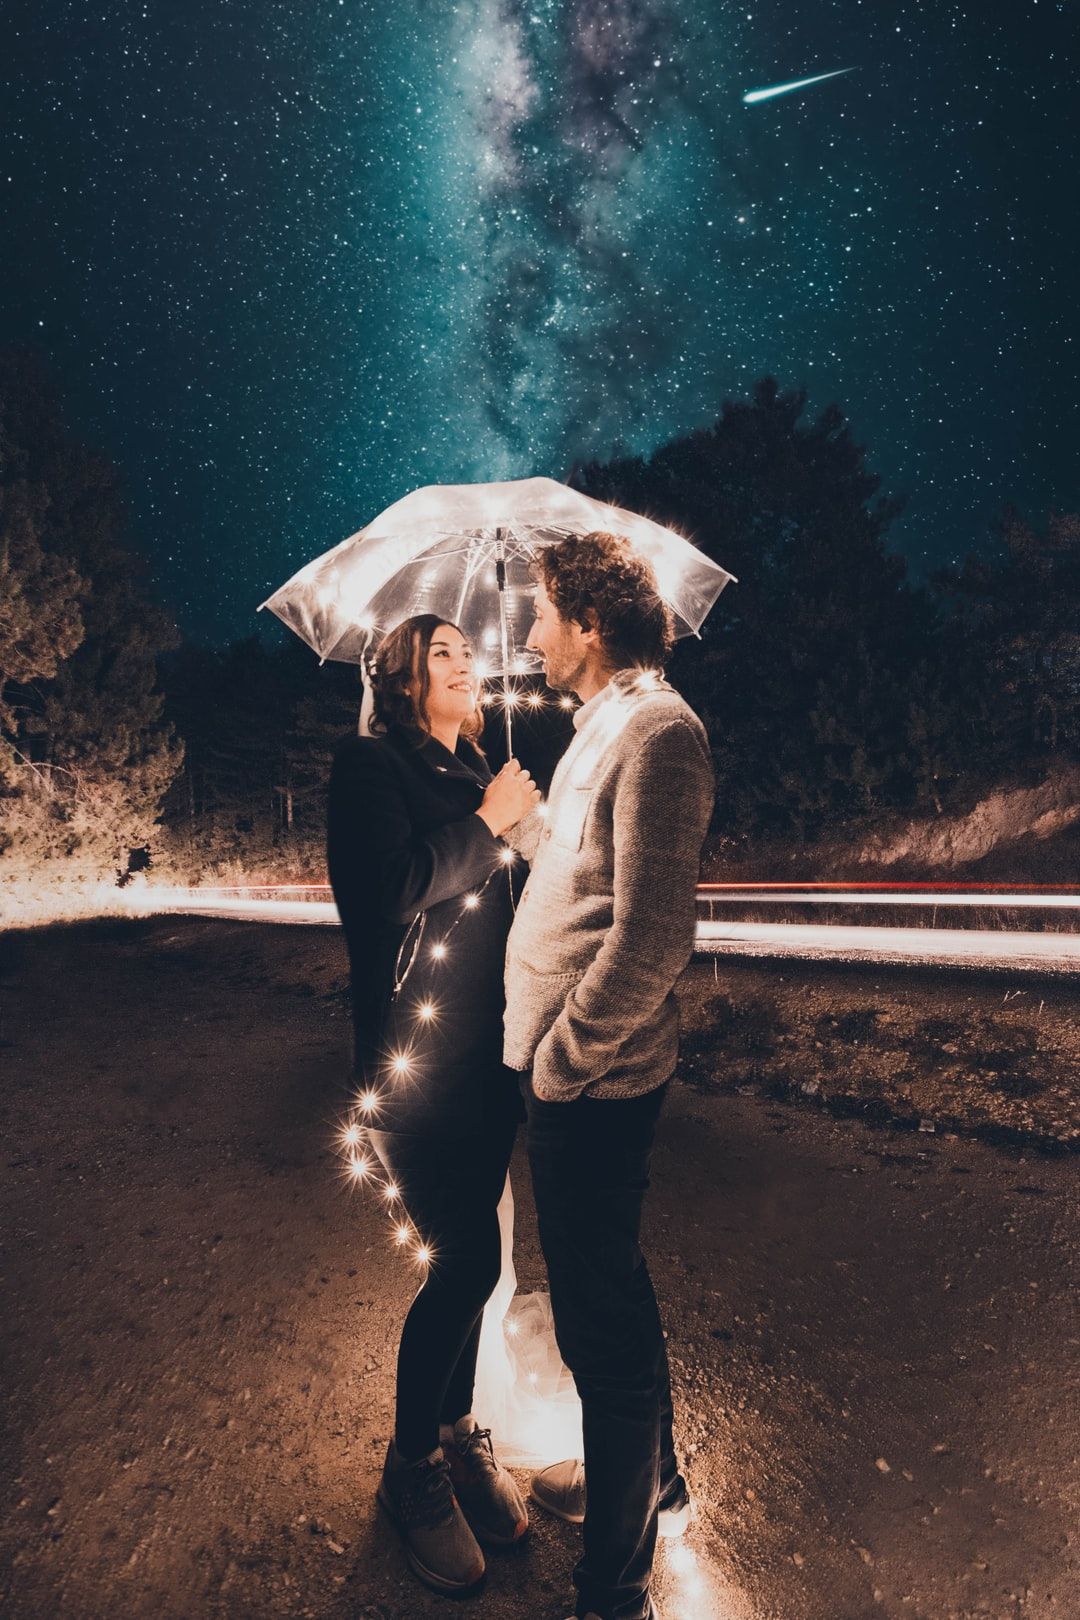 couple under clear umbrella with string lights during night photo